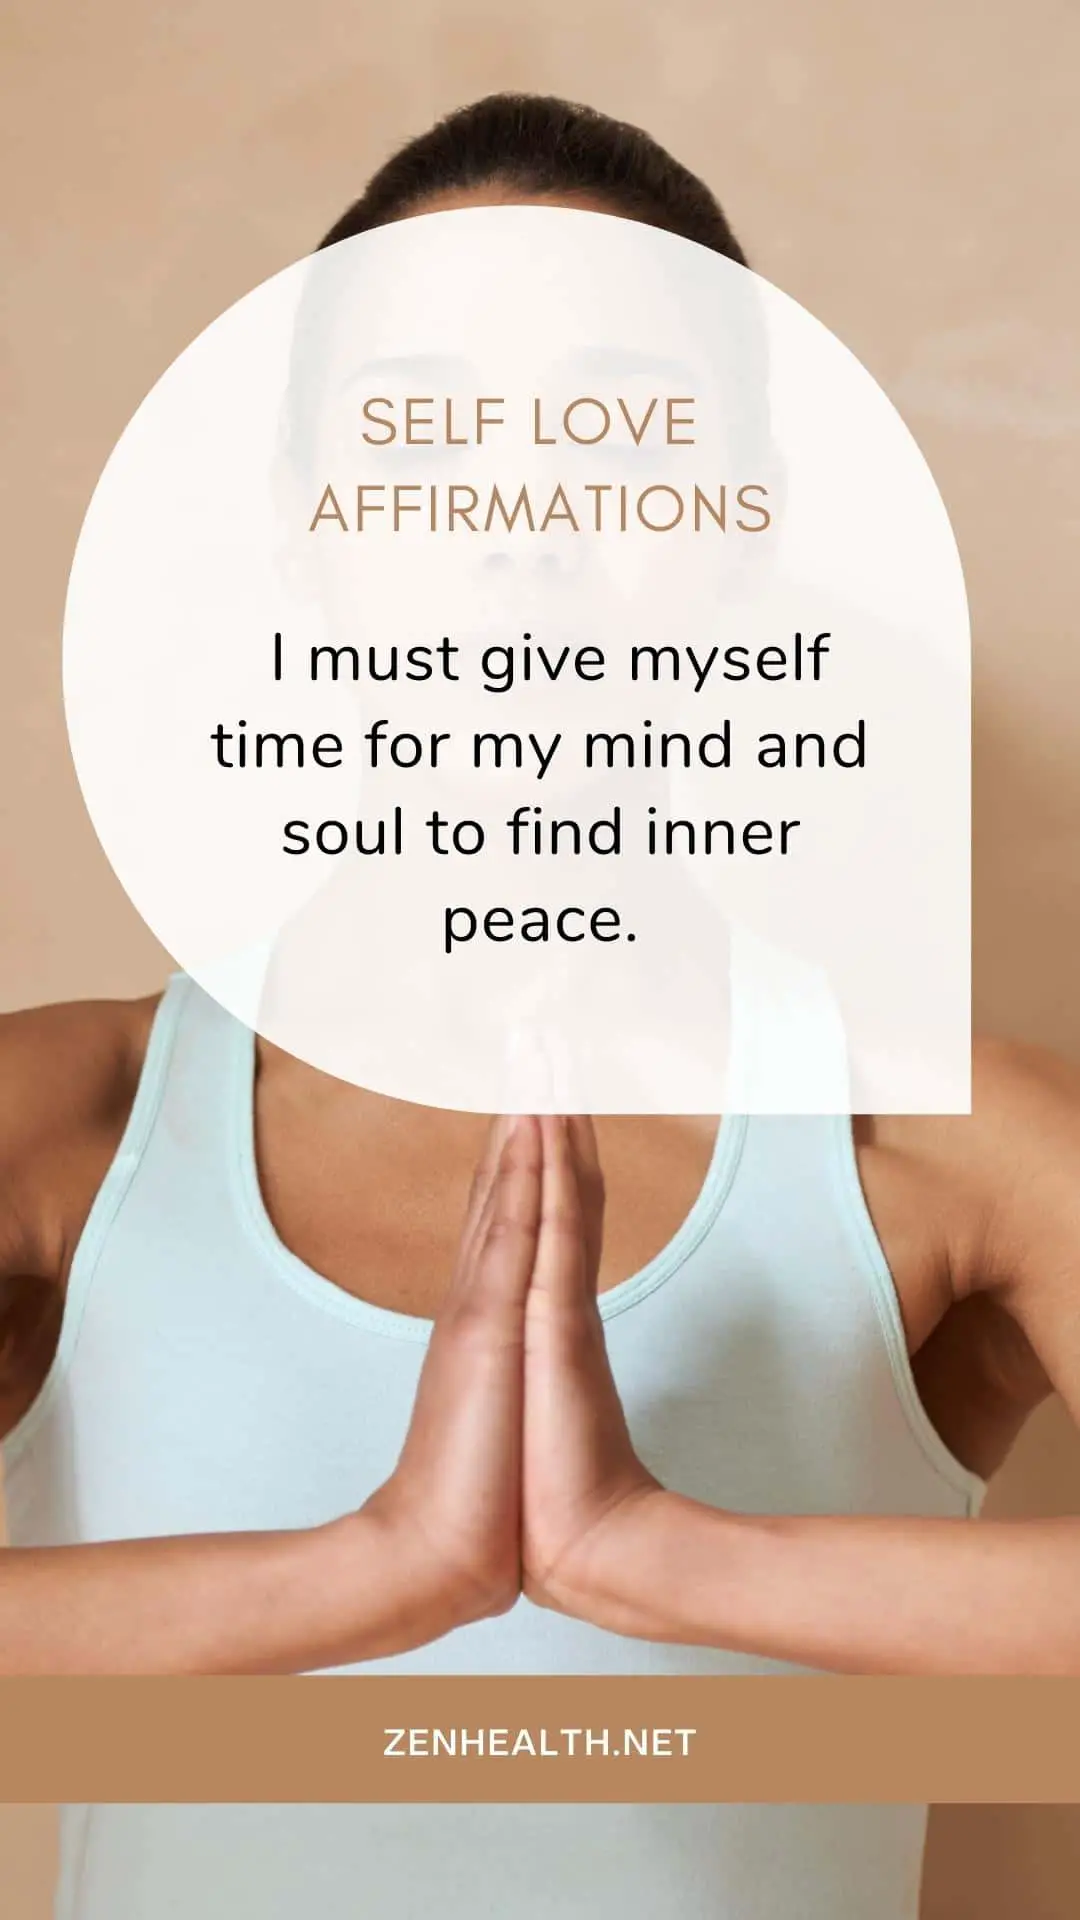 Self love affirmations: I must give myself time for my mind and soul to find inner peace